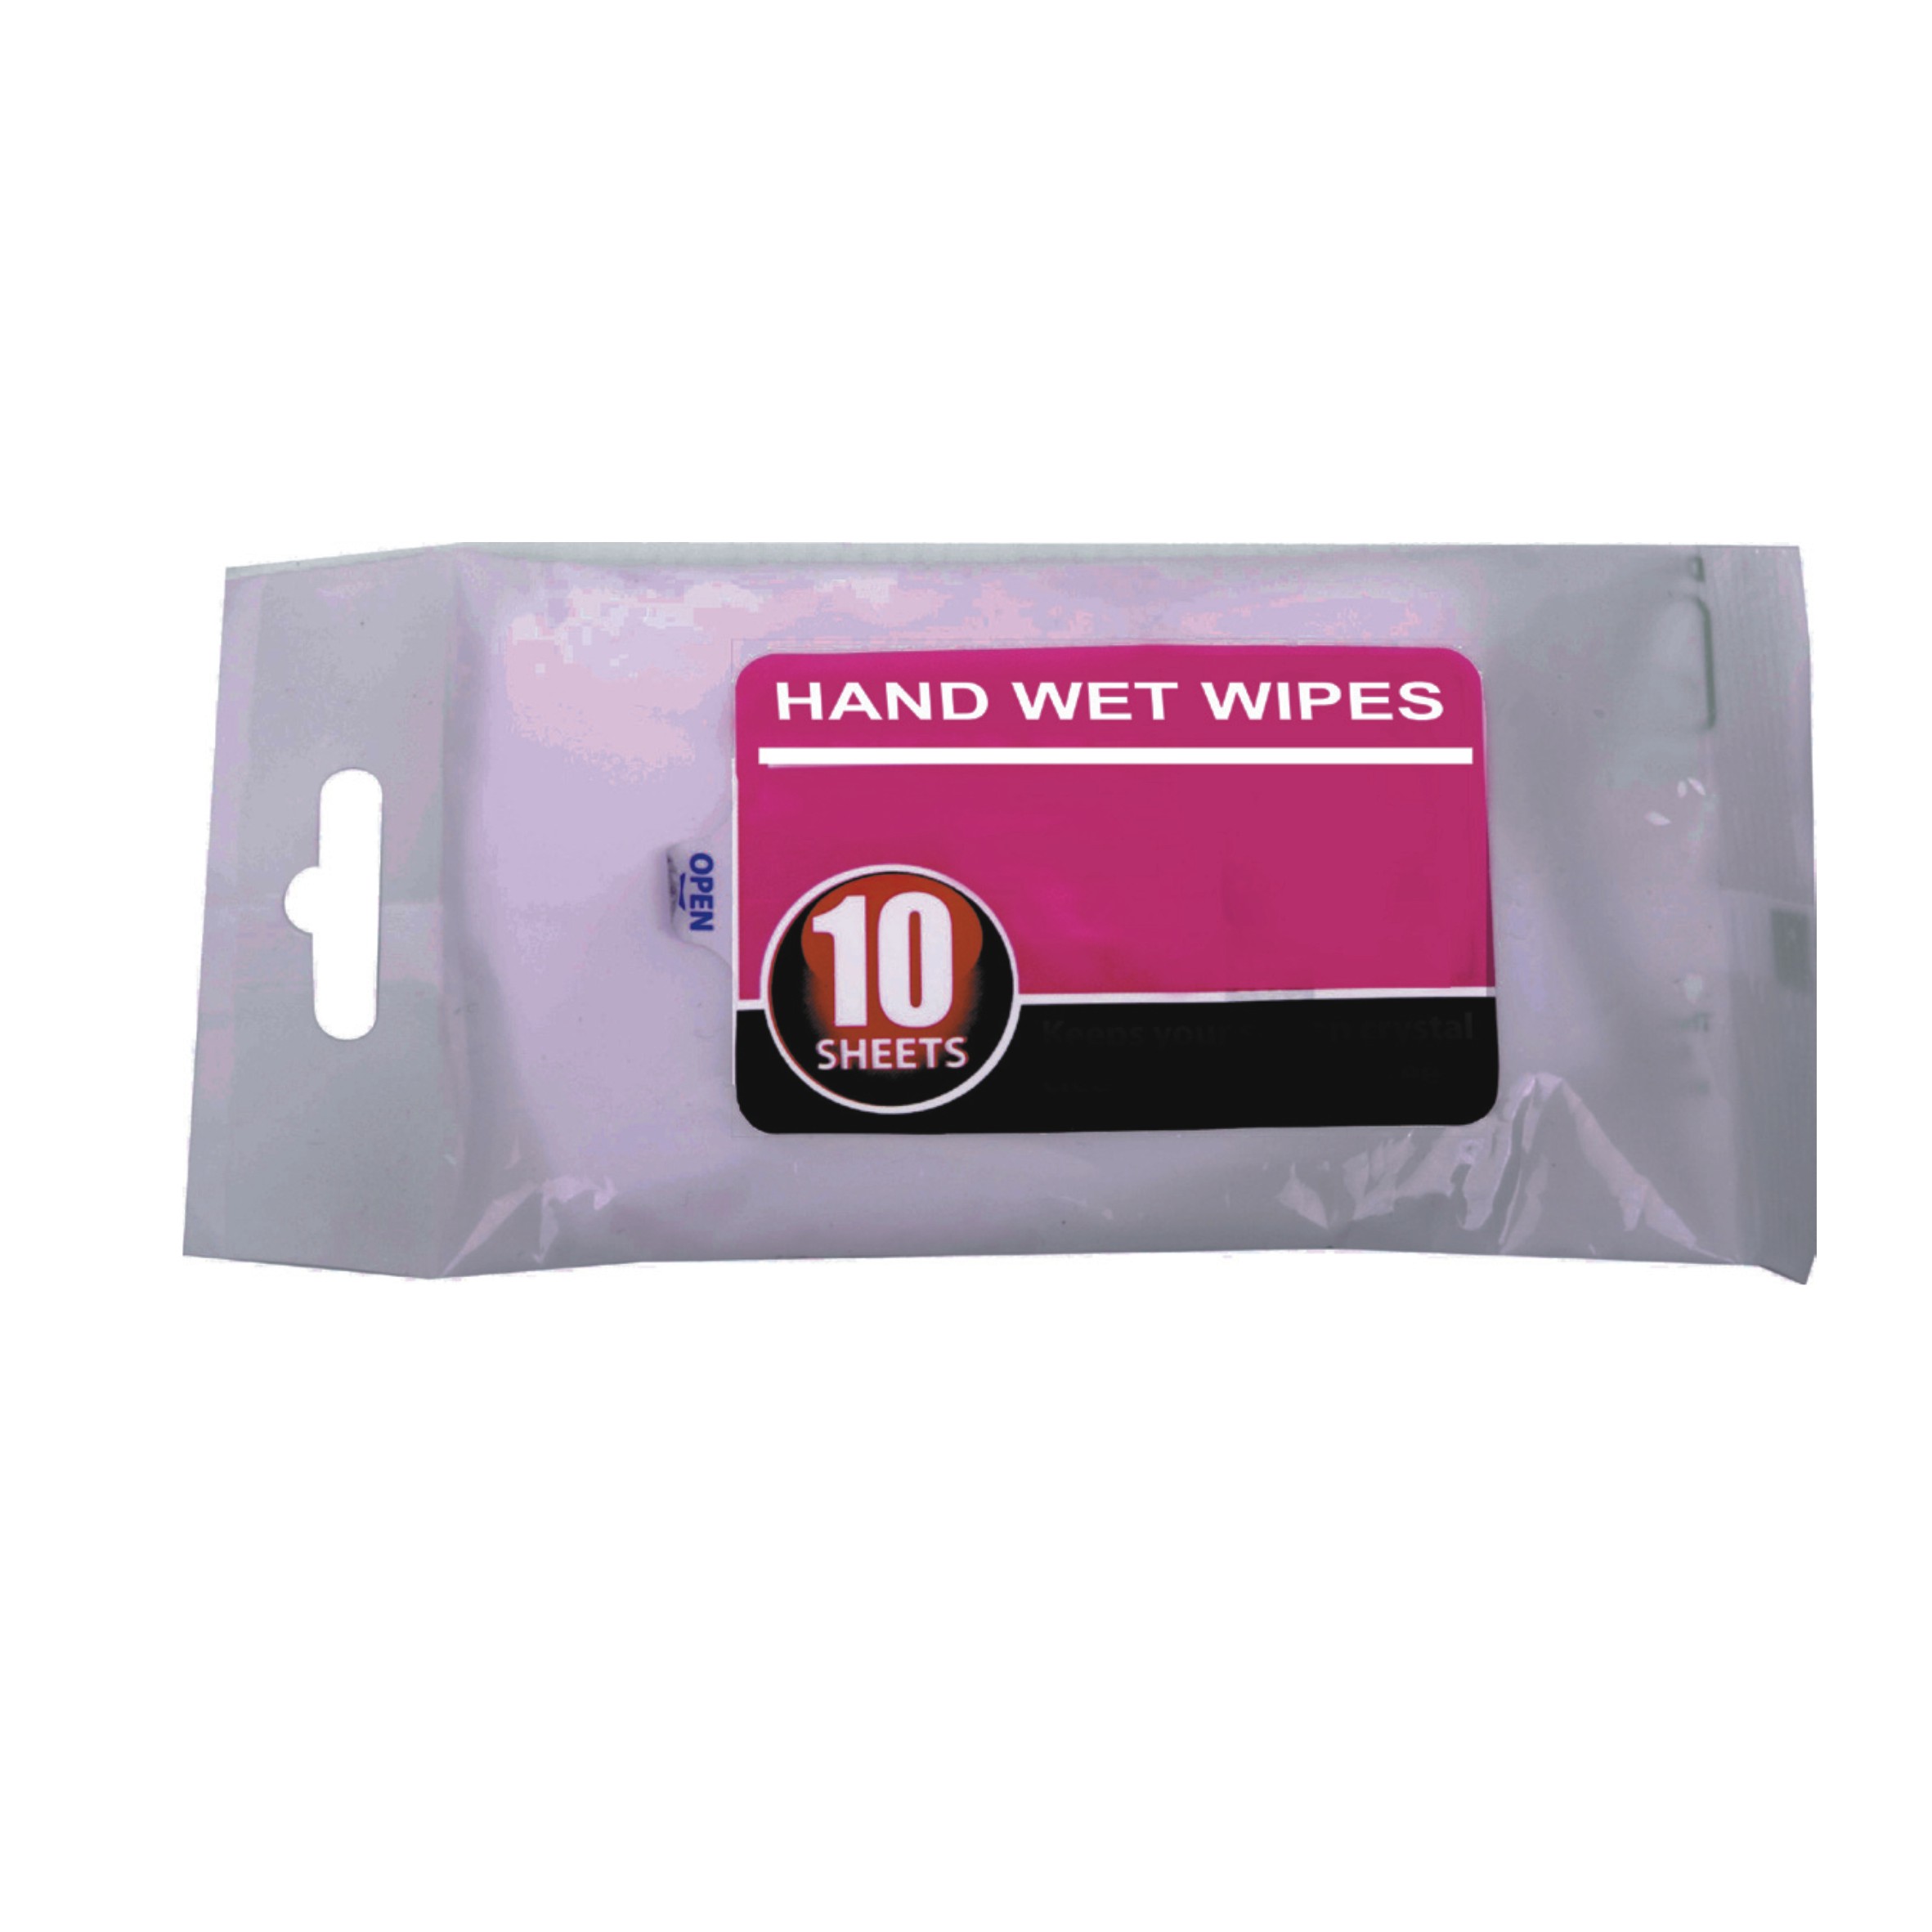 Hand Wet Wipes (10 Sheets)